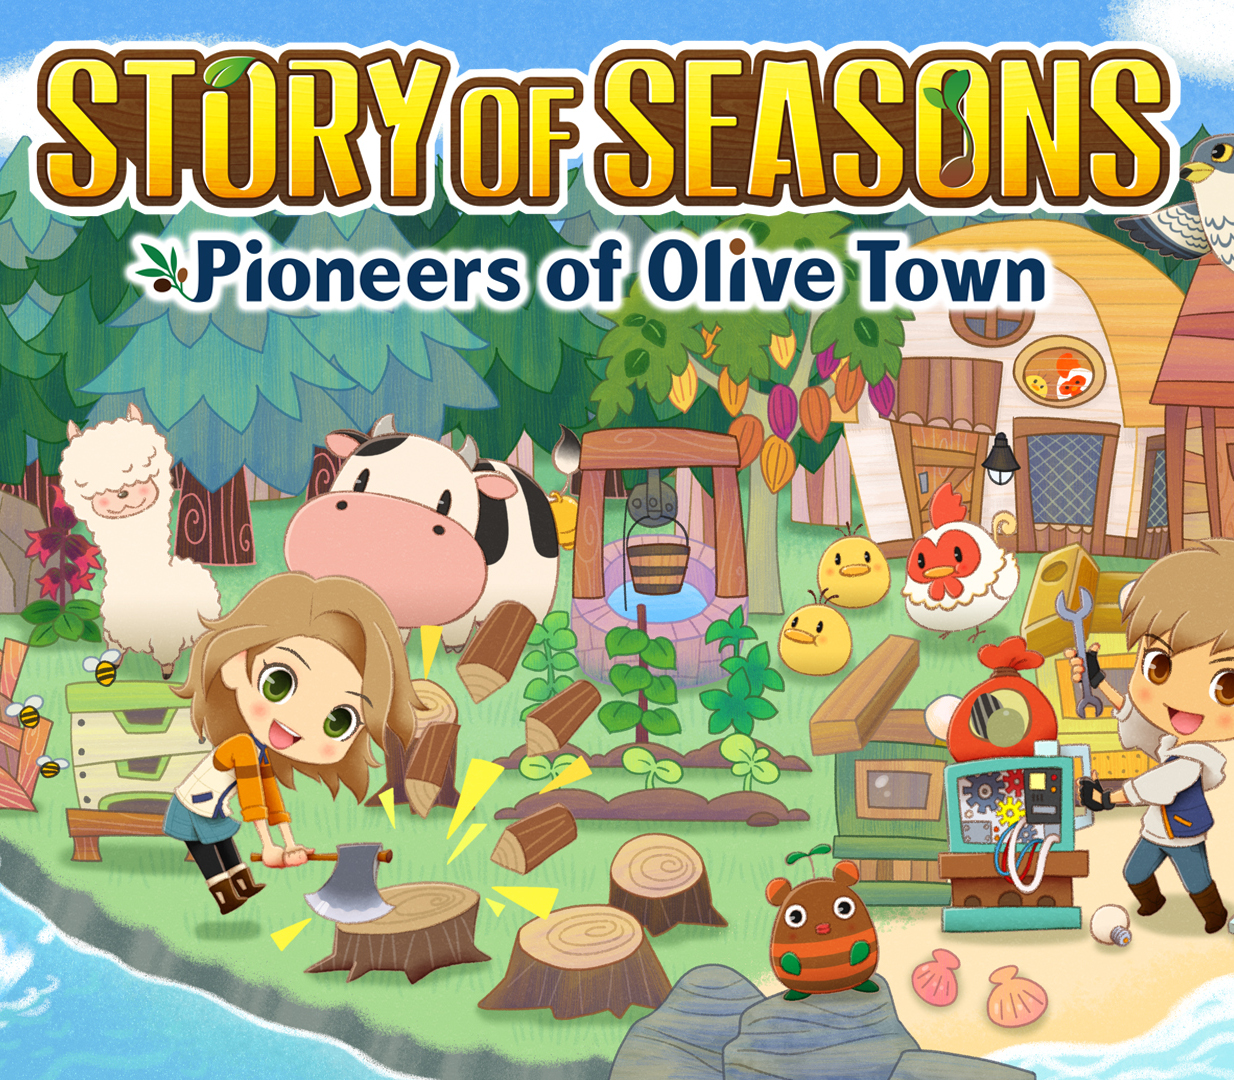 STORY OF SEASONS: Pioneers of Olive Town Nintendo Switch Account pixelpuffin.net Activation Link